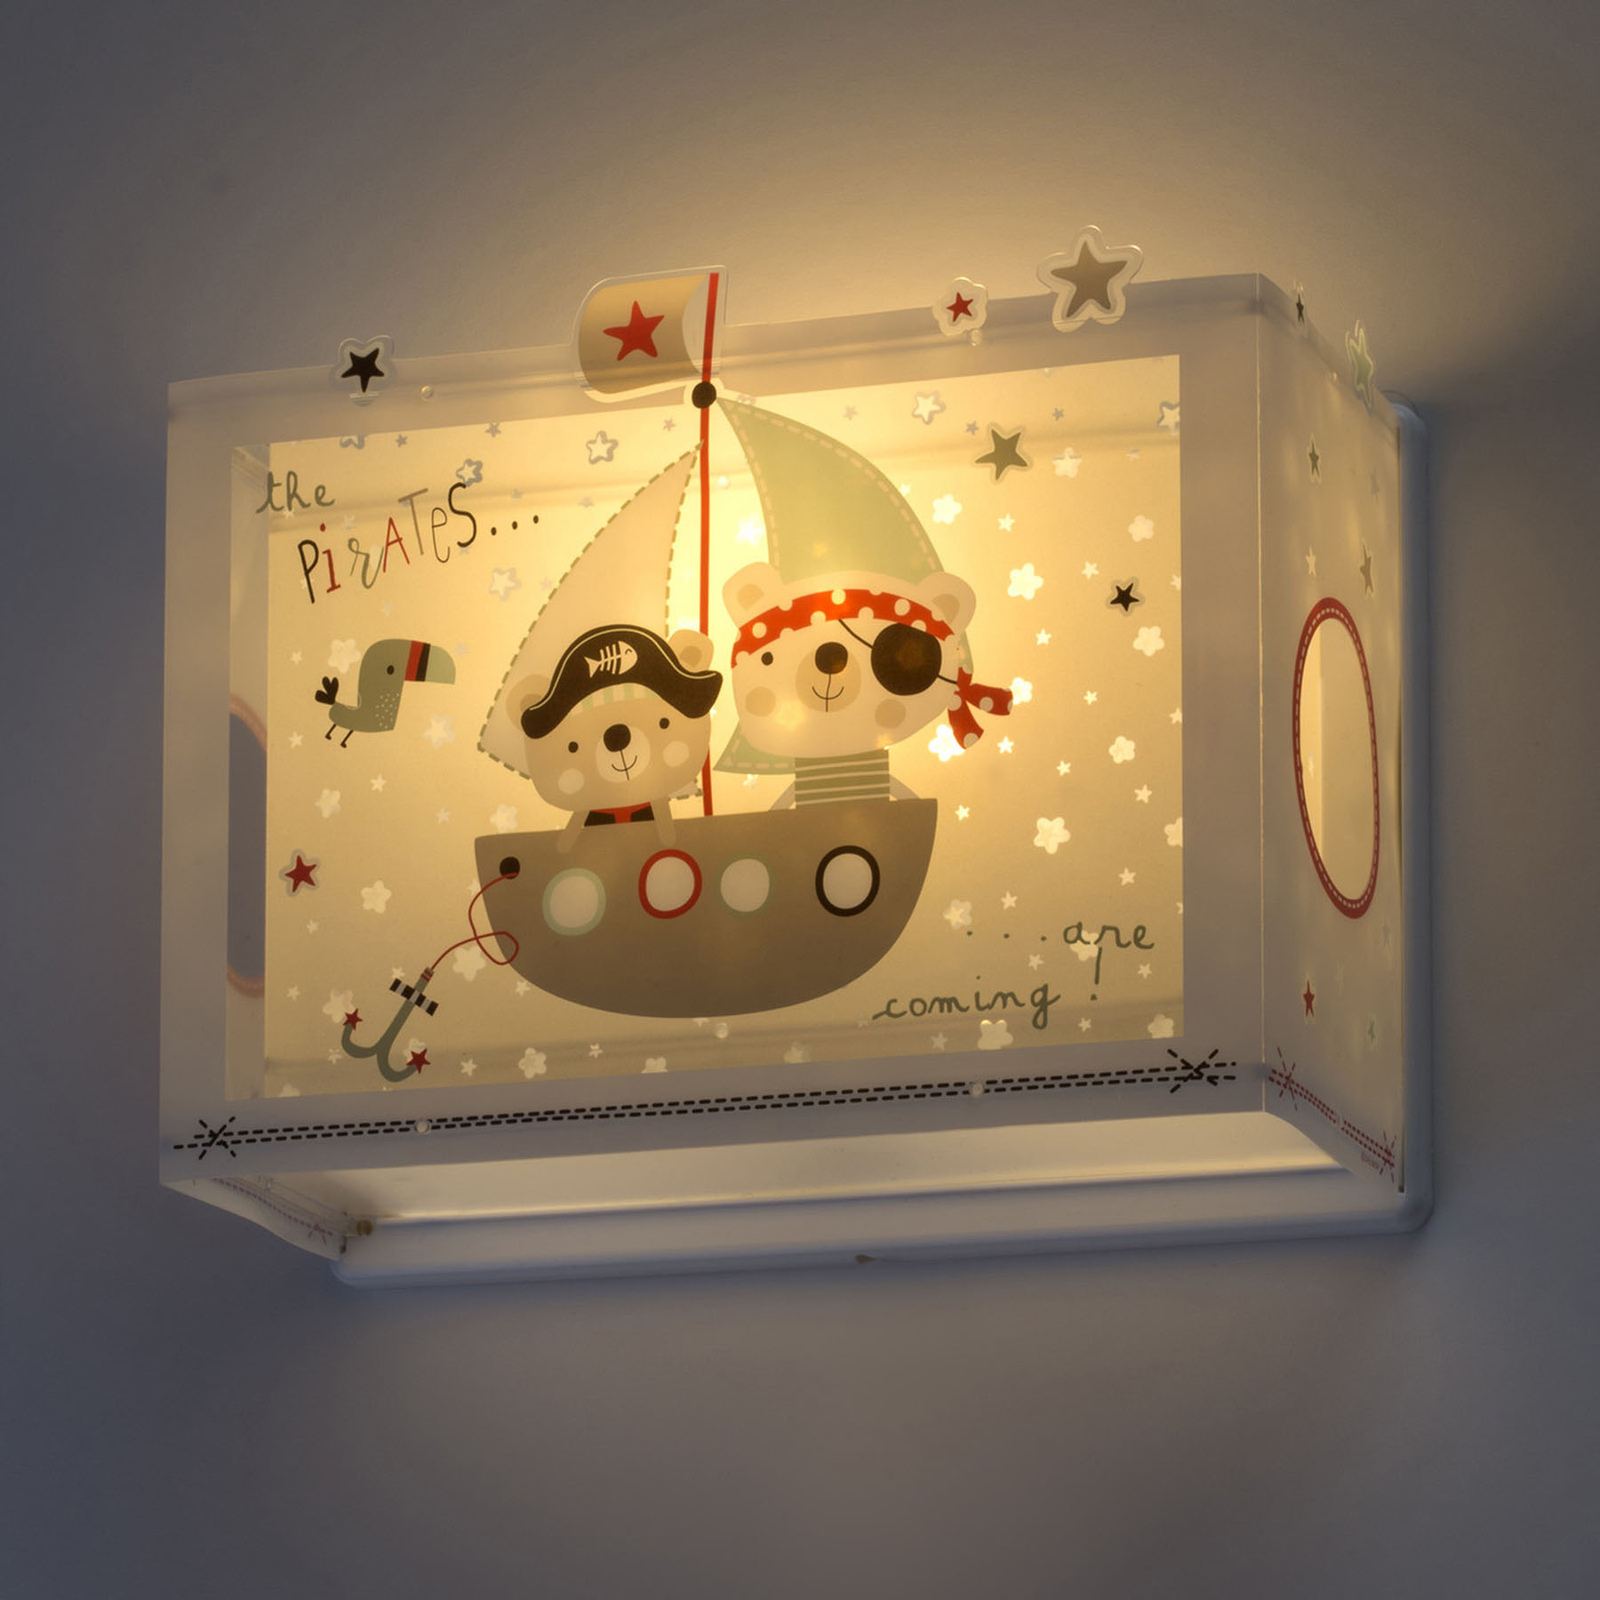 Children's wall light The Pirates with plug